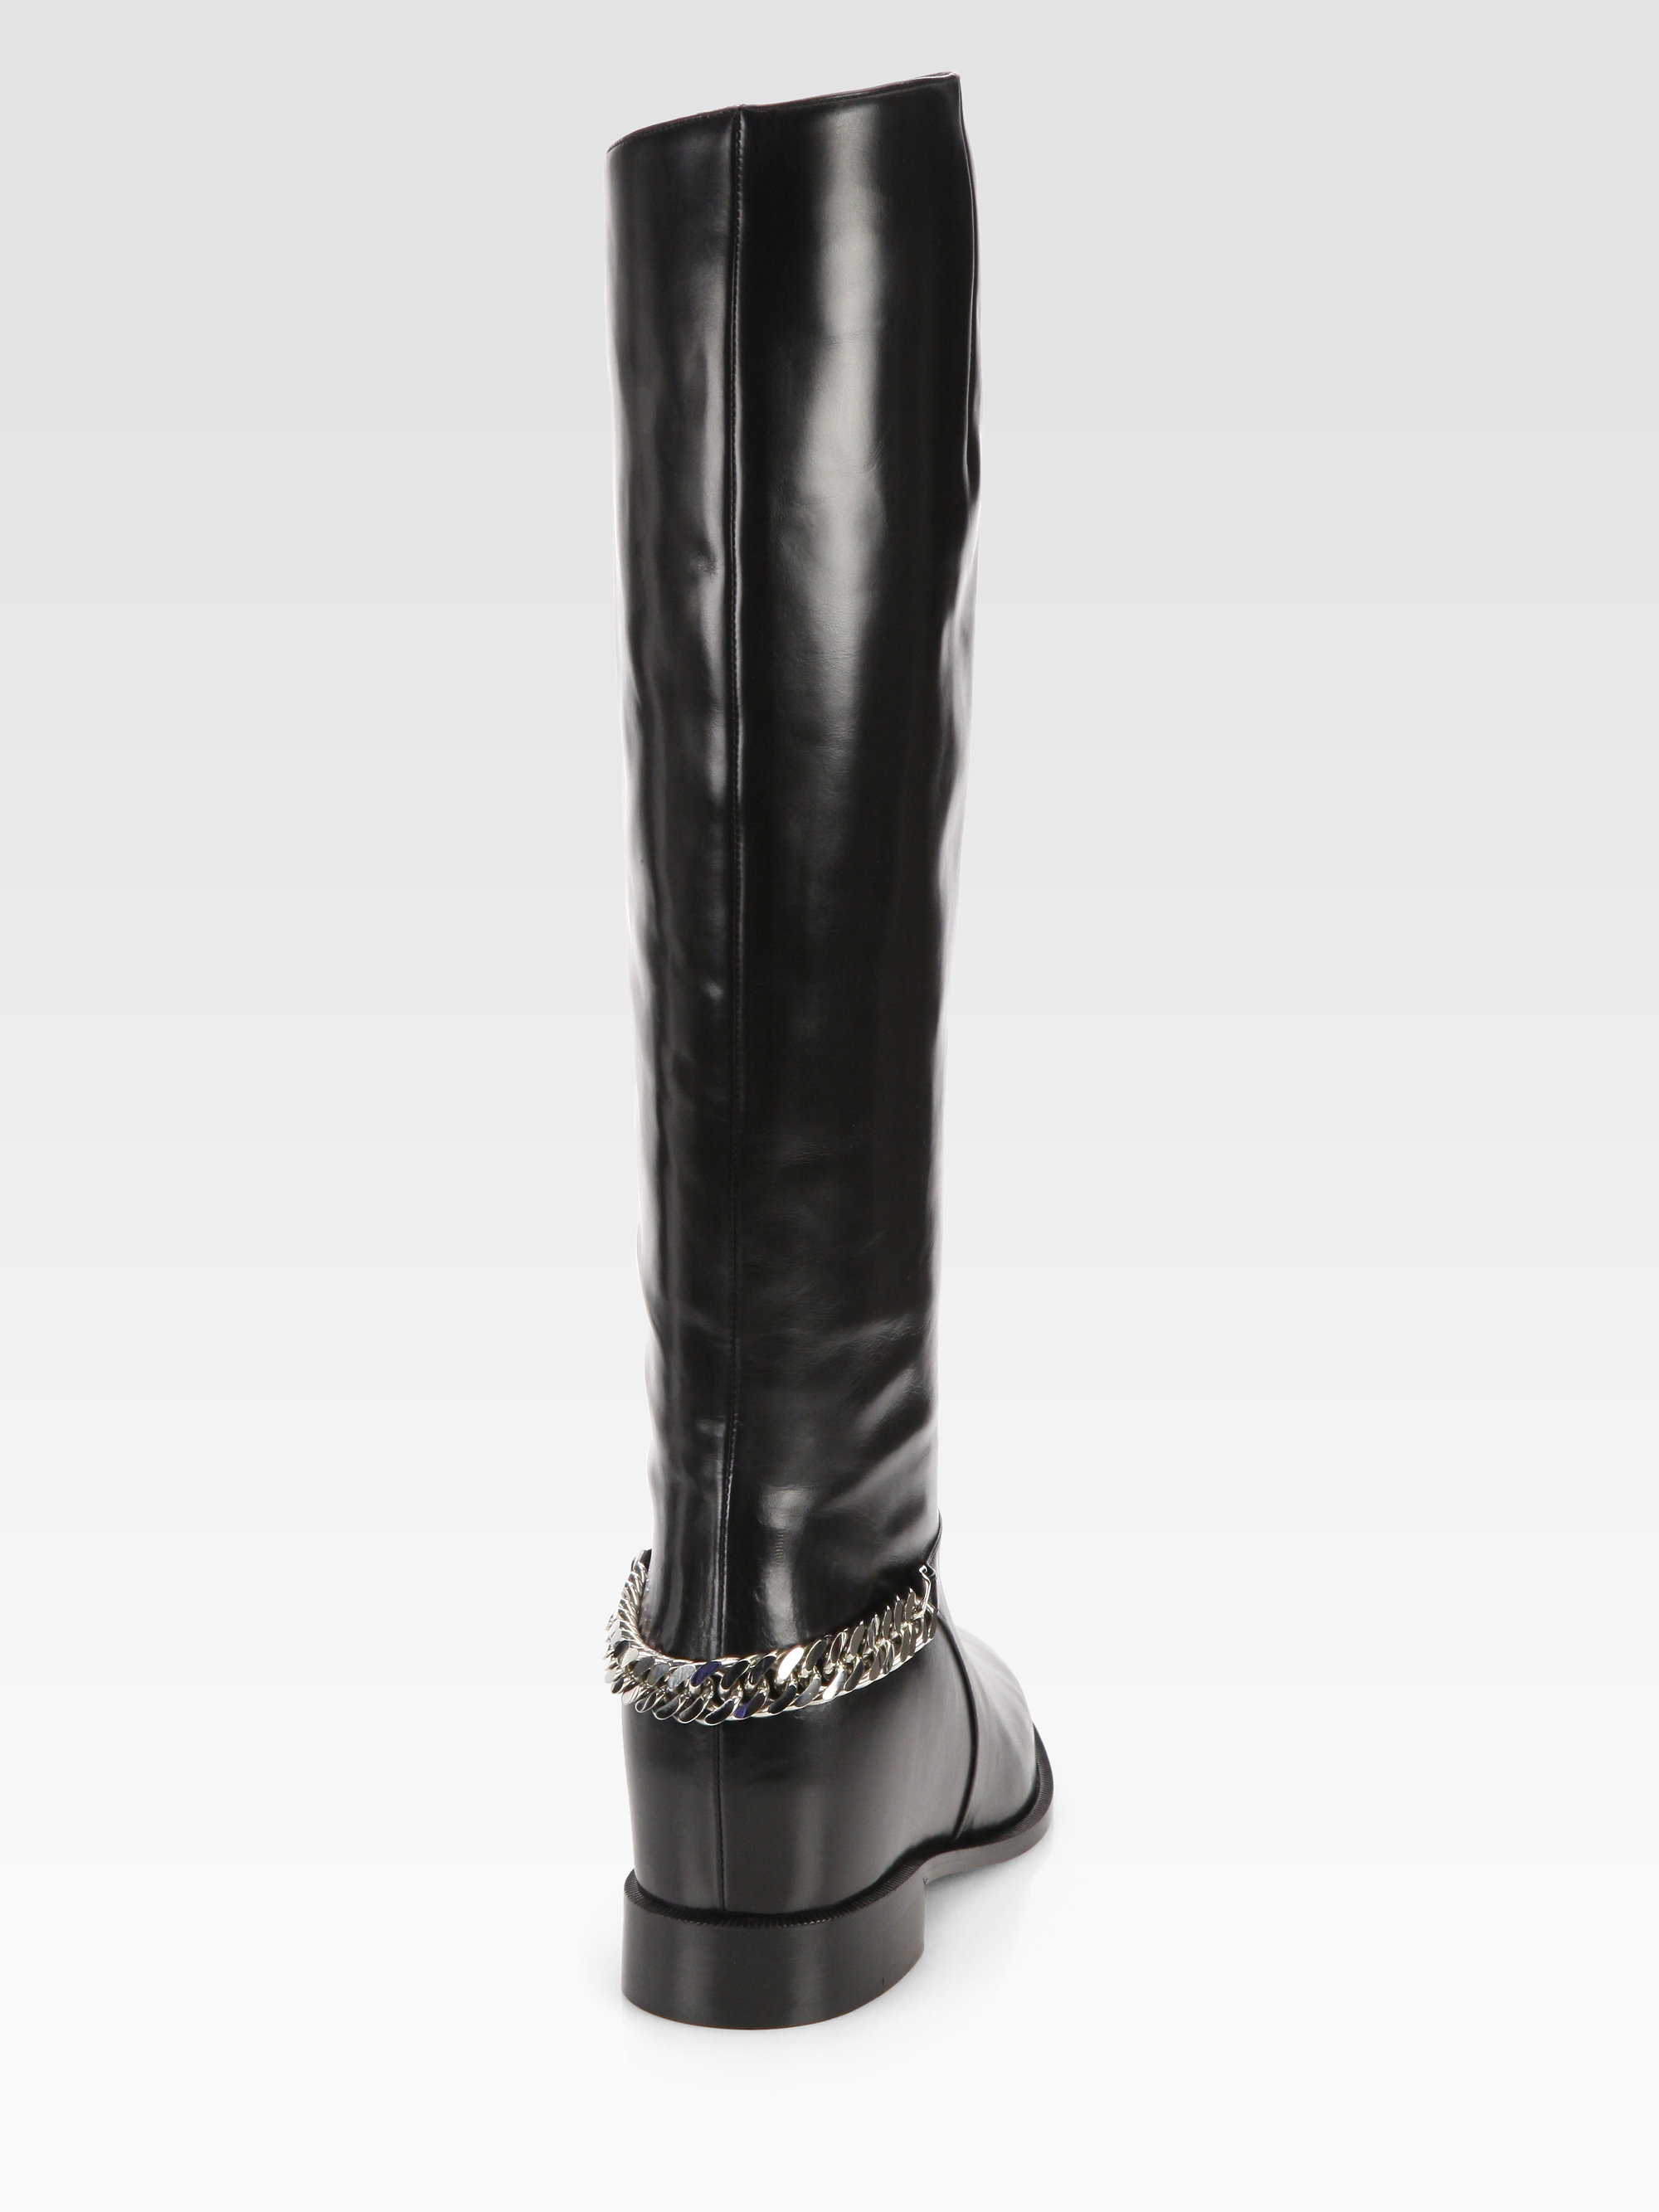 black christian louboutins - christian louboutin Cate knee-high boots | The Little Arts Academy